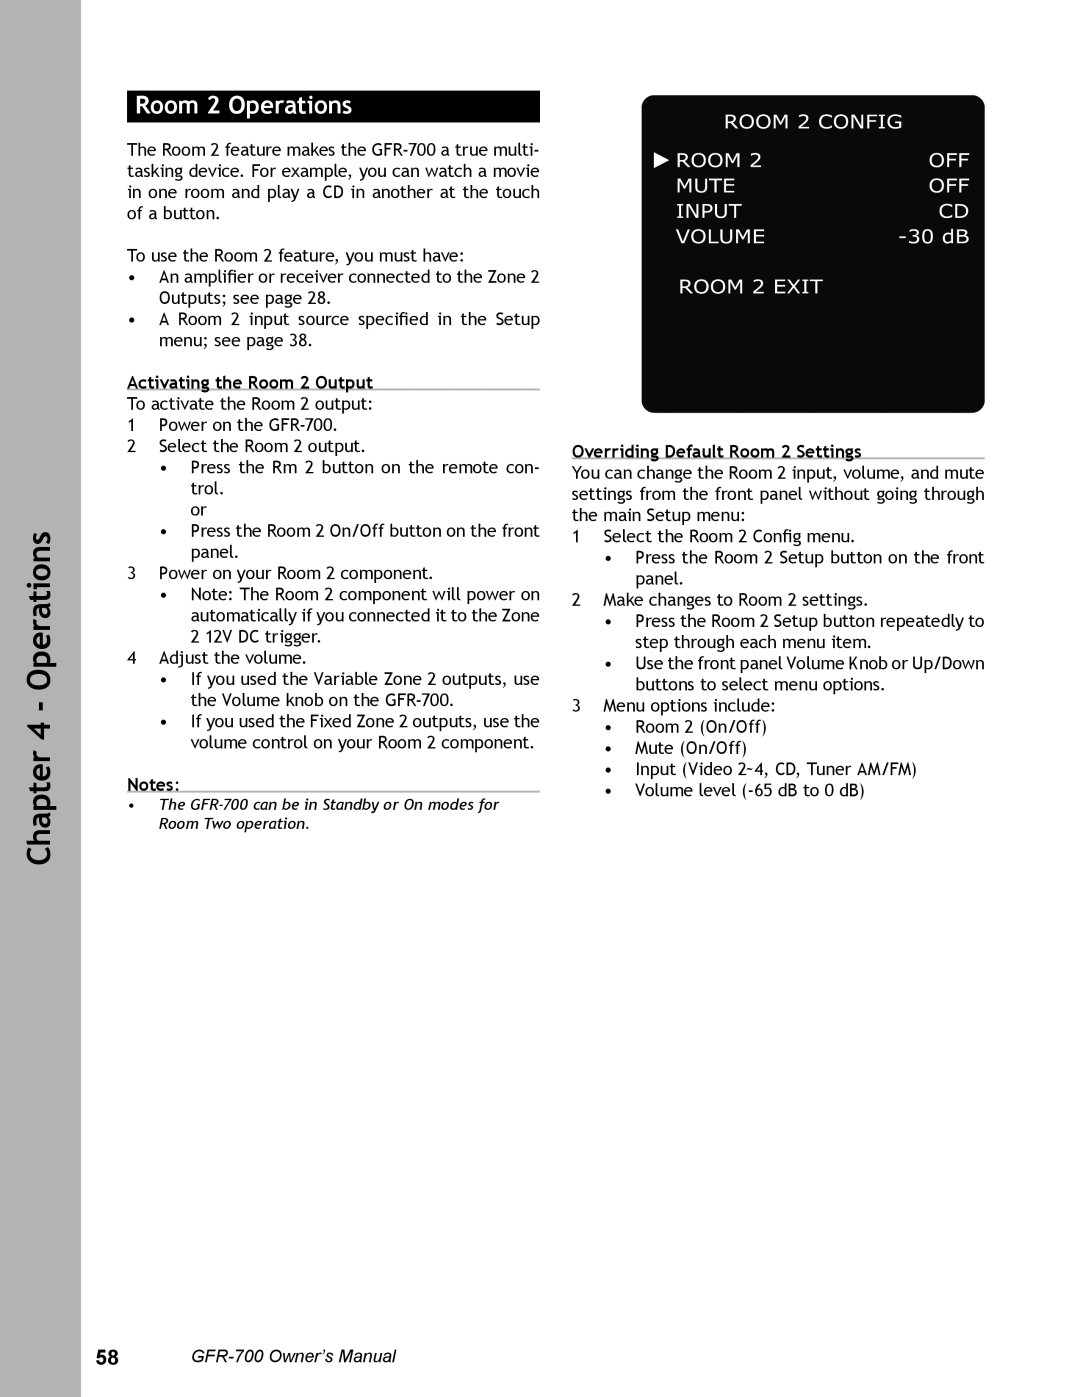 Adcom GFR-700 user manual Room 2 Operations, Activating the Room 2 Output, Overriding Default Room 2 Settings 